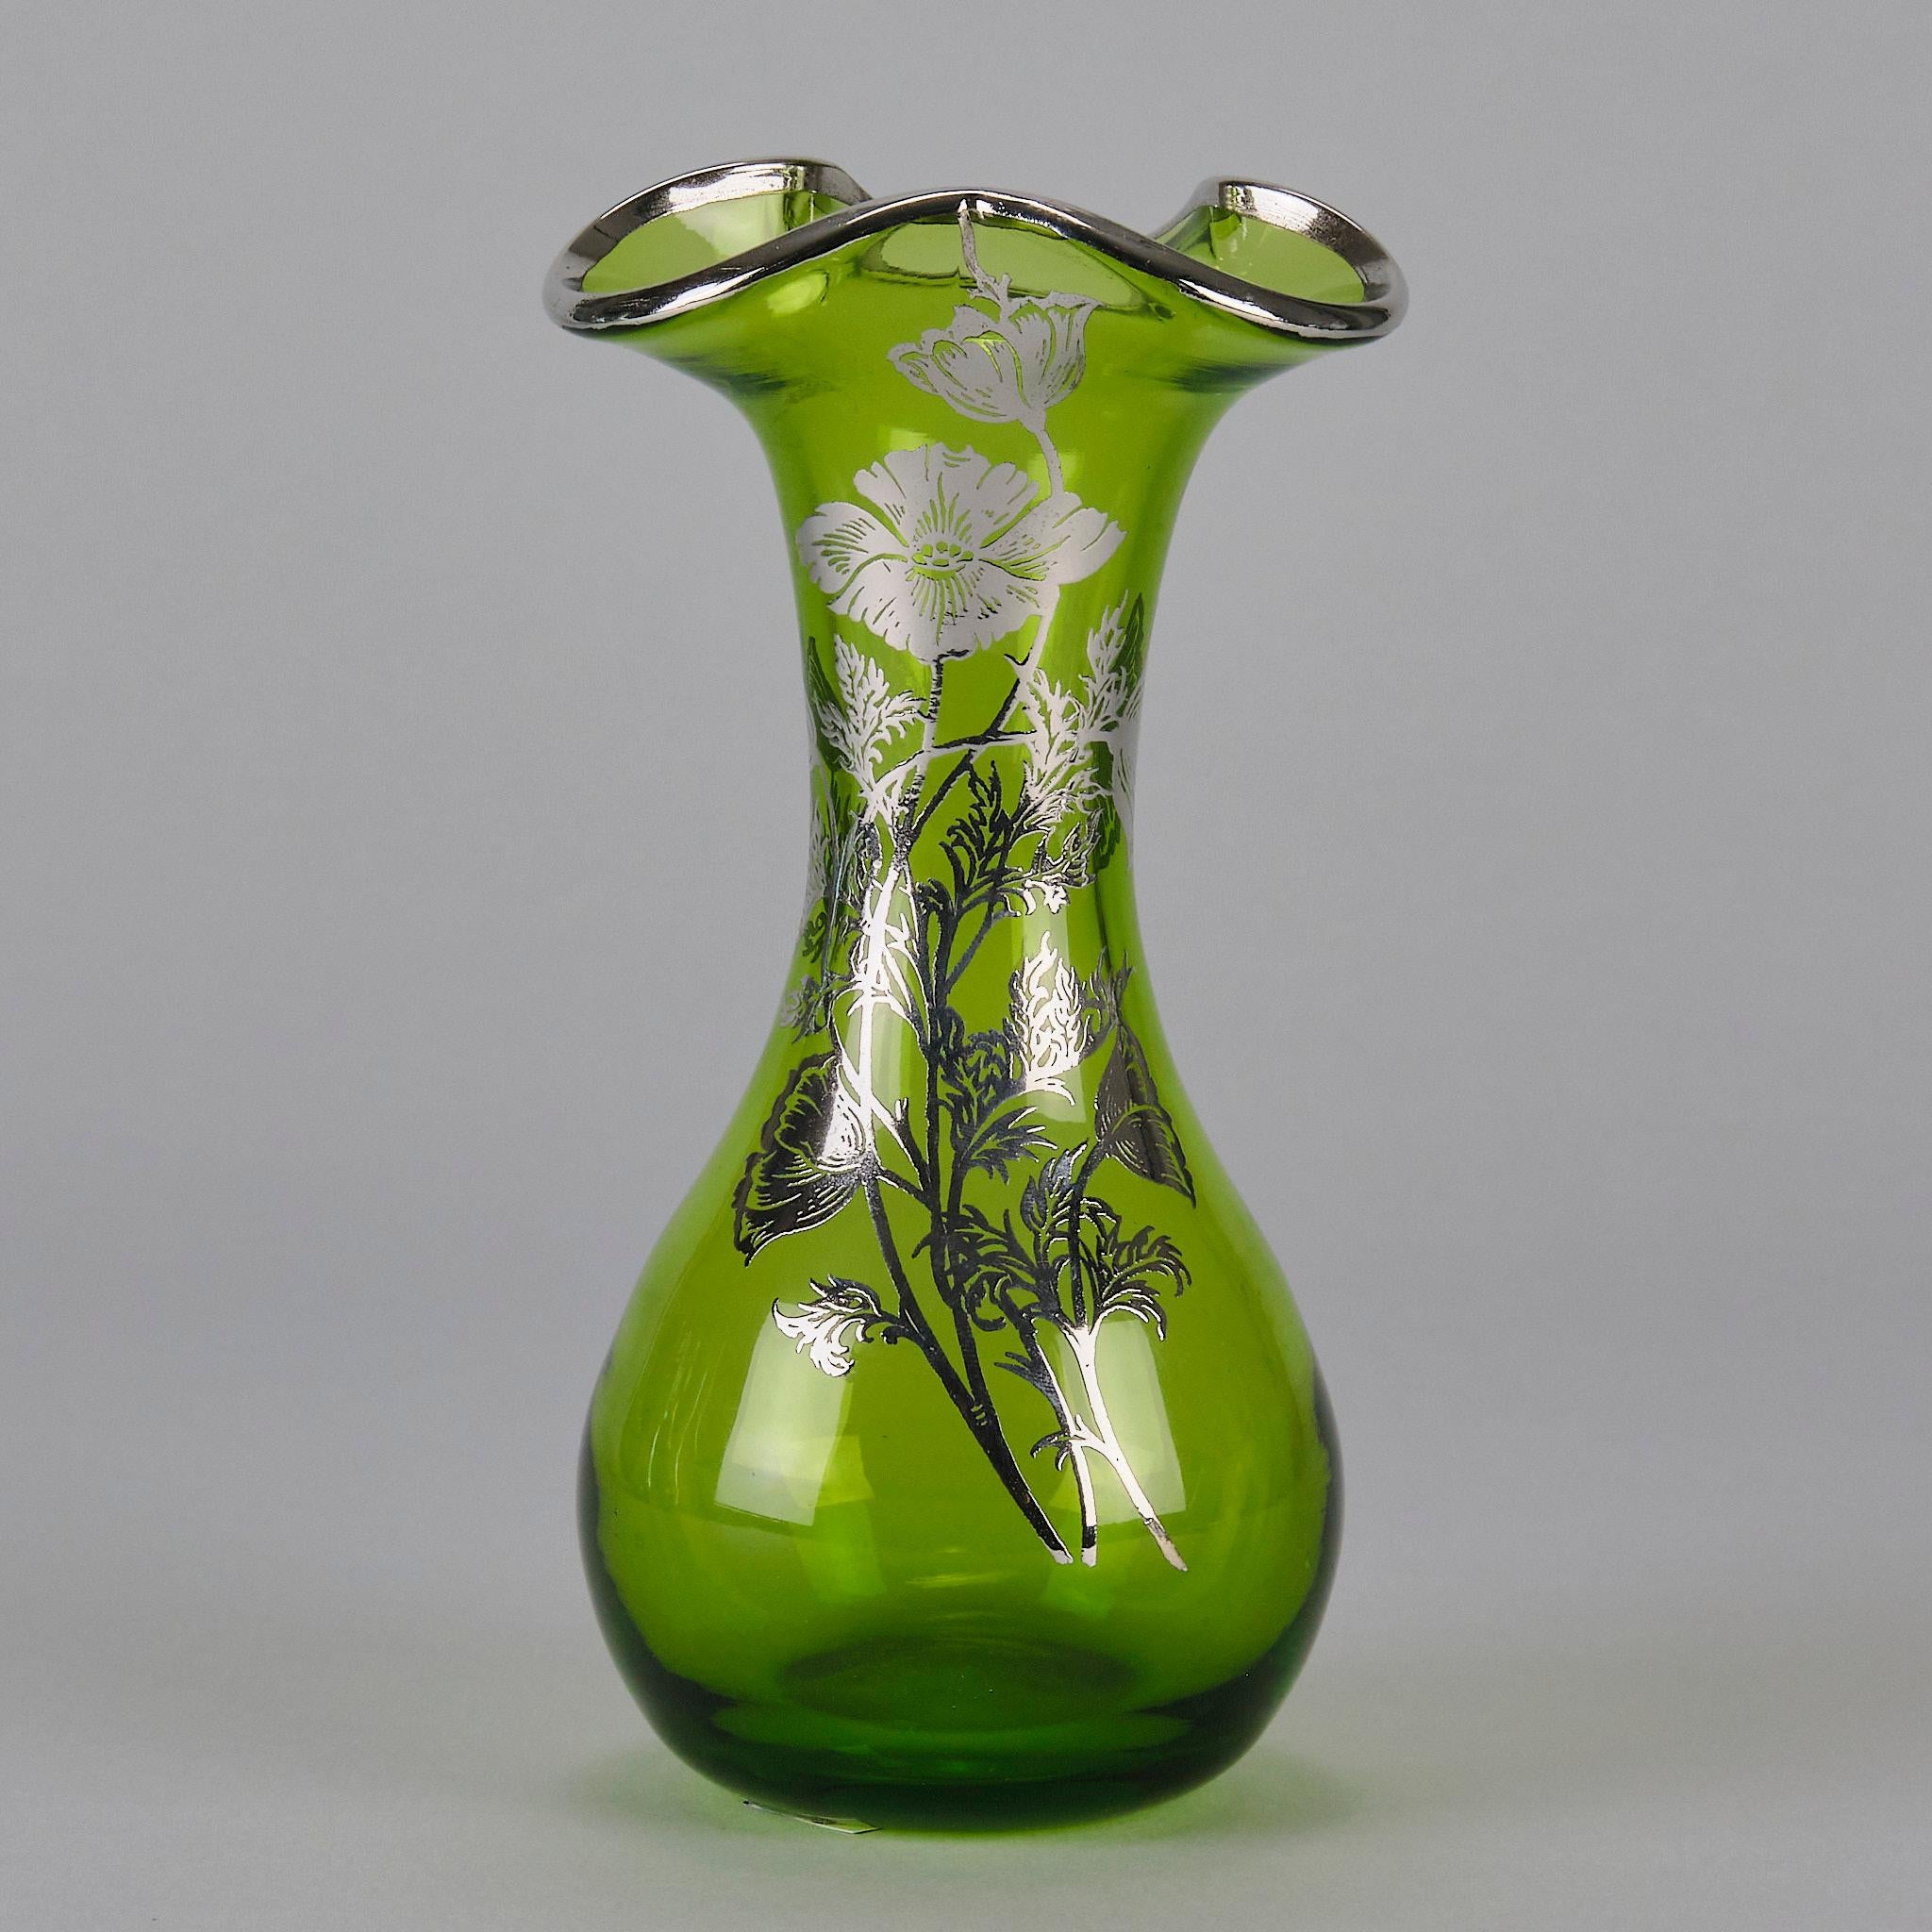 An excellent early 20th century American Glass Art Nouveau silvered vase. The surface of the vase has an iridescent green casing highlighting the central decorative flower made out of applied silver.

ADDITIONAL INFORMATION

Height: 17 cm

Depth: 9